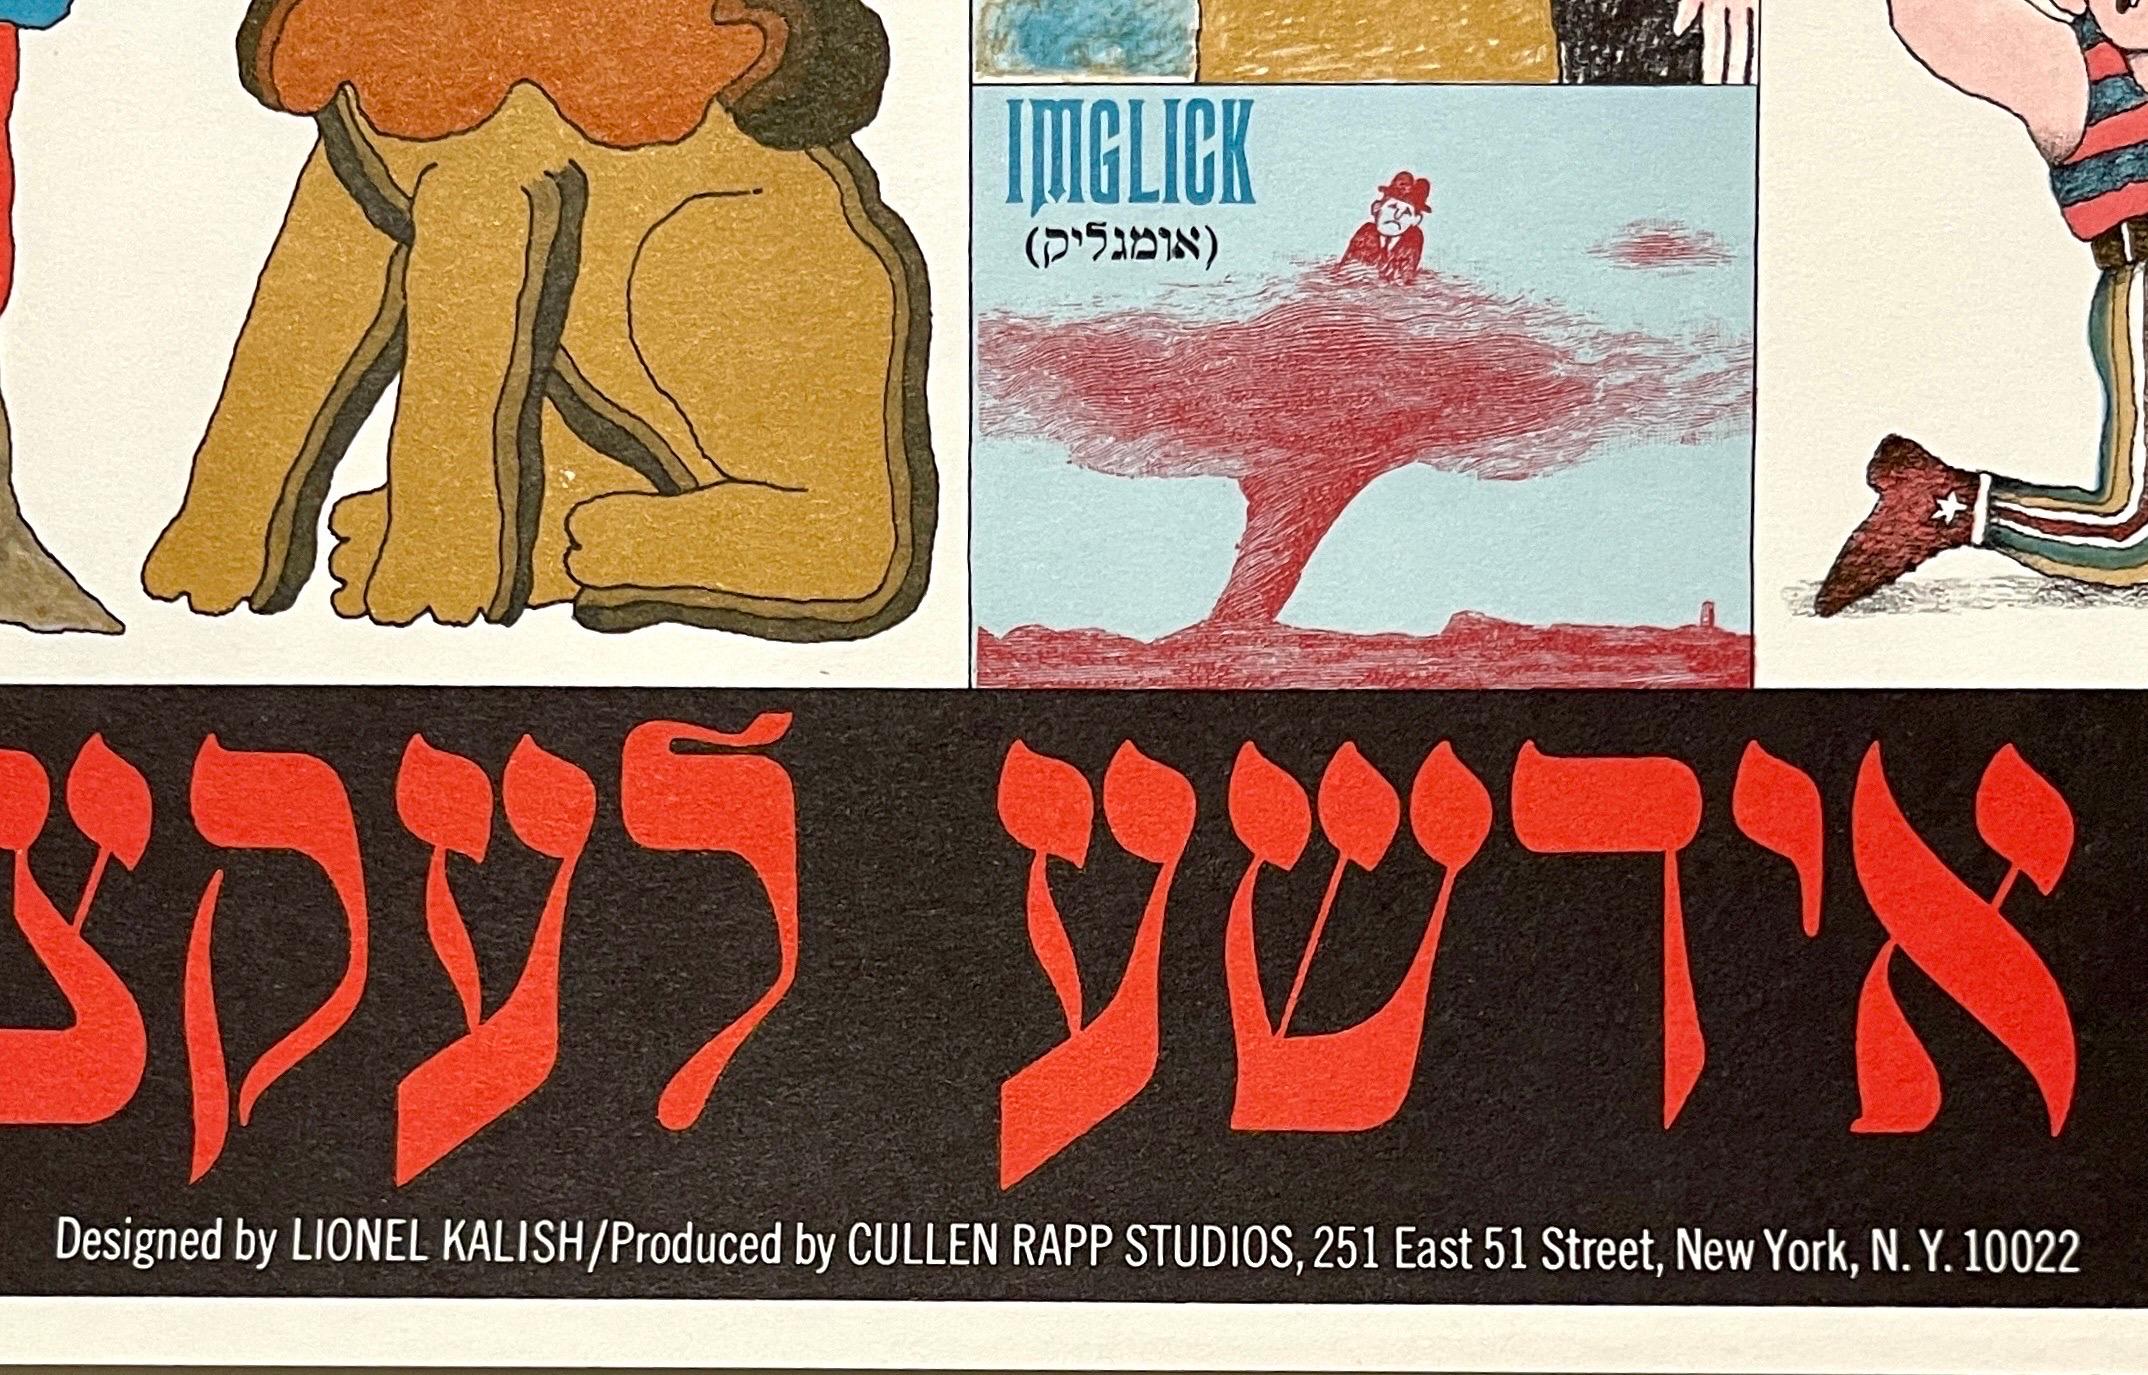 Great vintage mid century Pop Art poster depicting images to define the Yiddish terms in the animated cartoon panels. This colorful poster designed by Lionel Kalish offers whimsical cartoons to illustrate the meanings of Yiddish words. This Poster